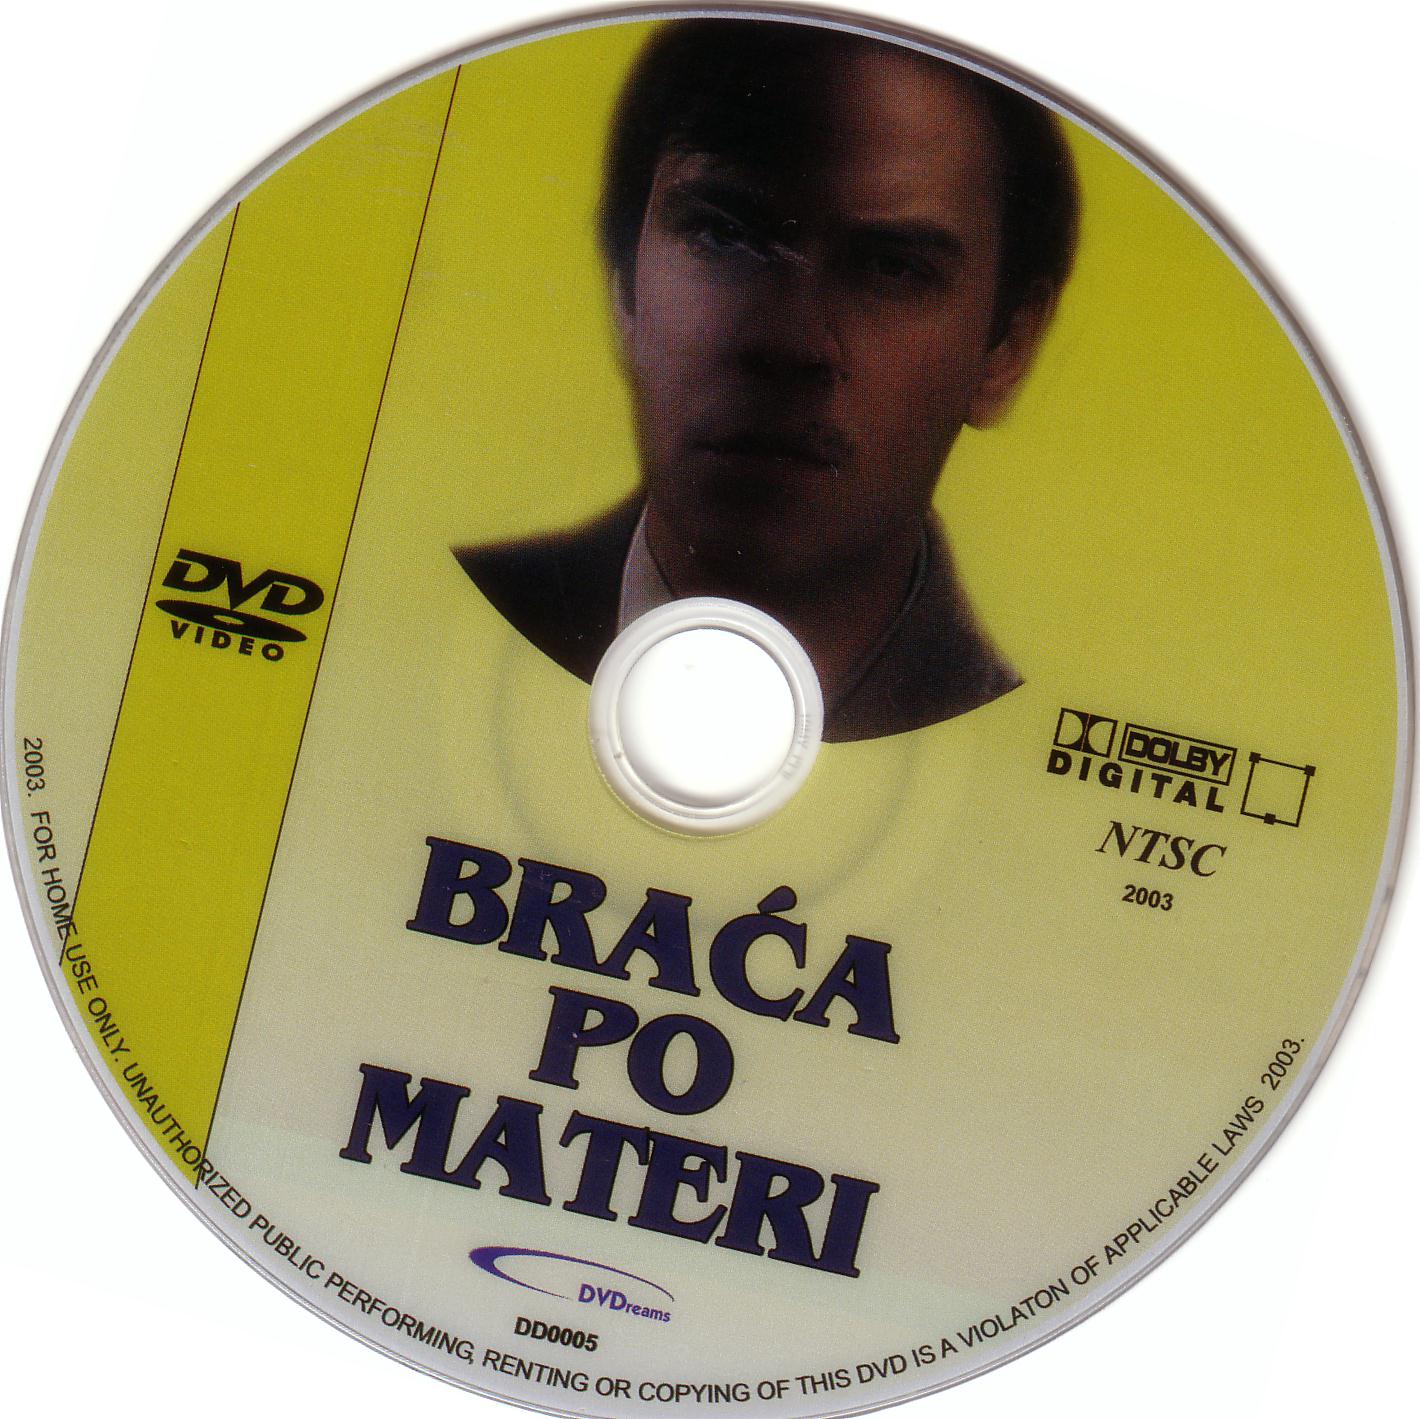 Click to view full size image -  DVD Cover - B - DVD - BRACA PO MATERI - CD - DVD - BRACA PO MATERI - CD.JPG